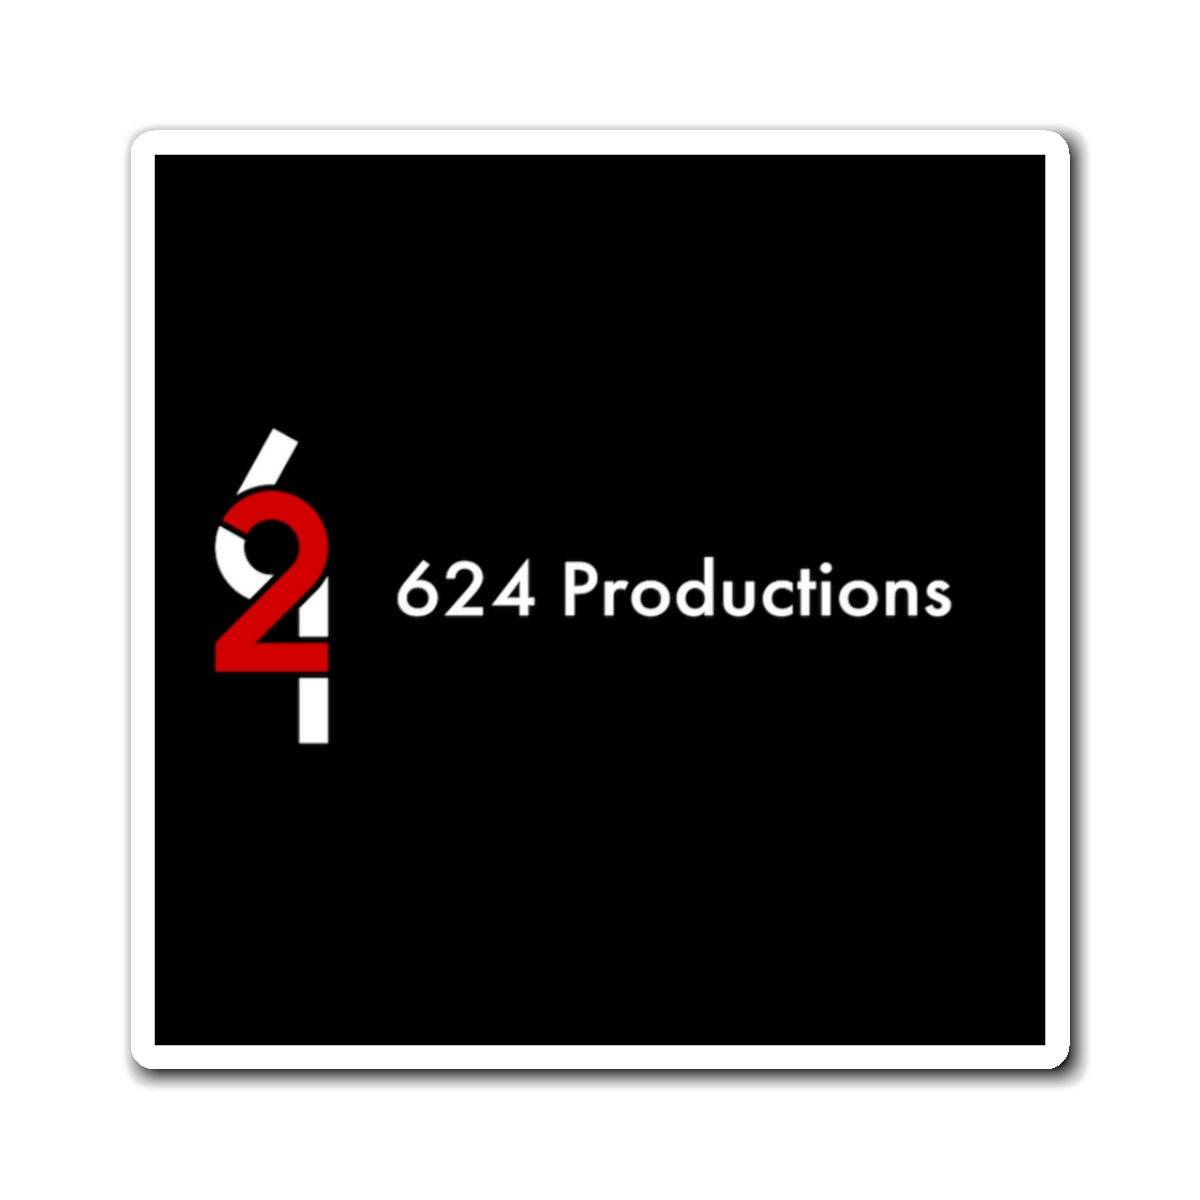 624 Productions Magnets